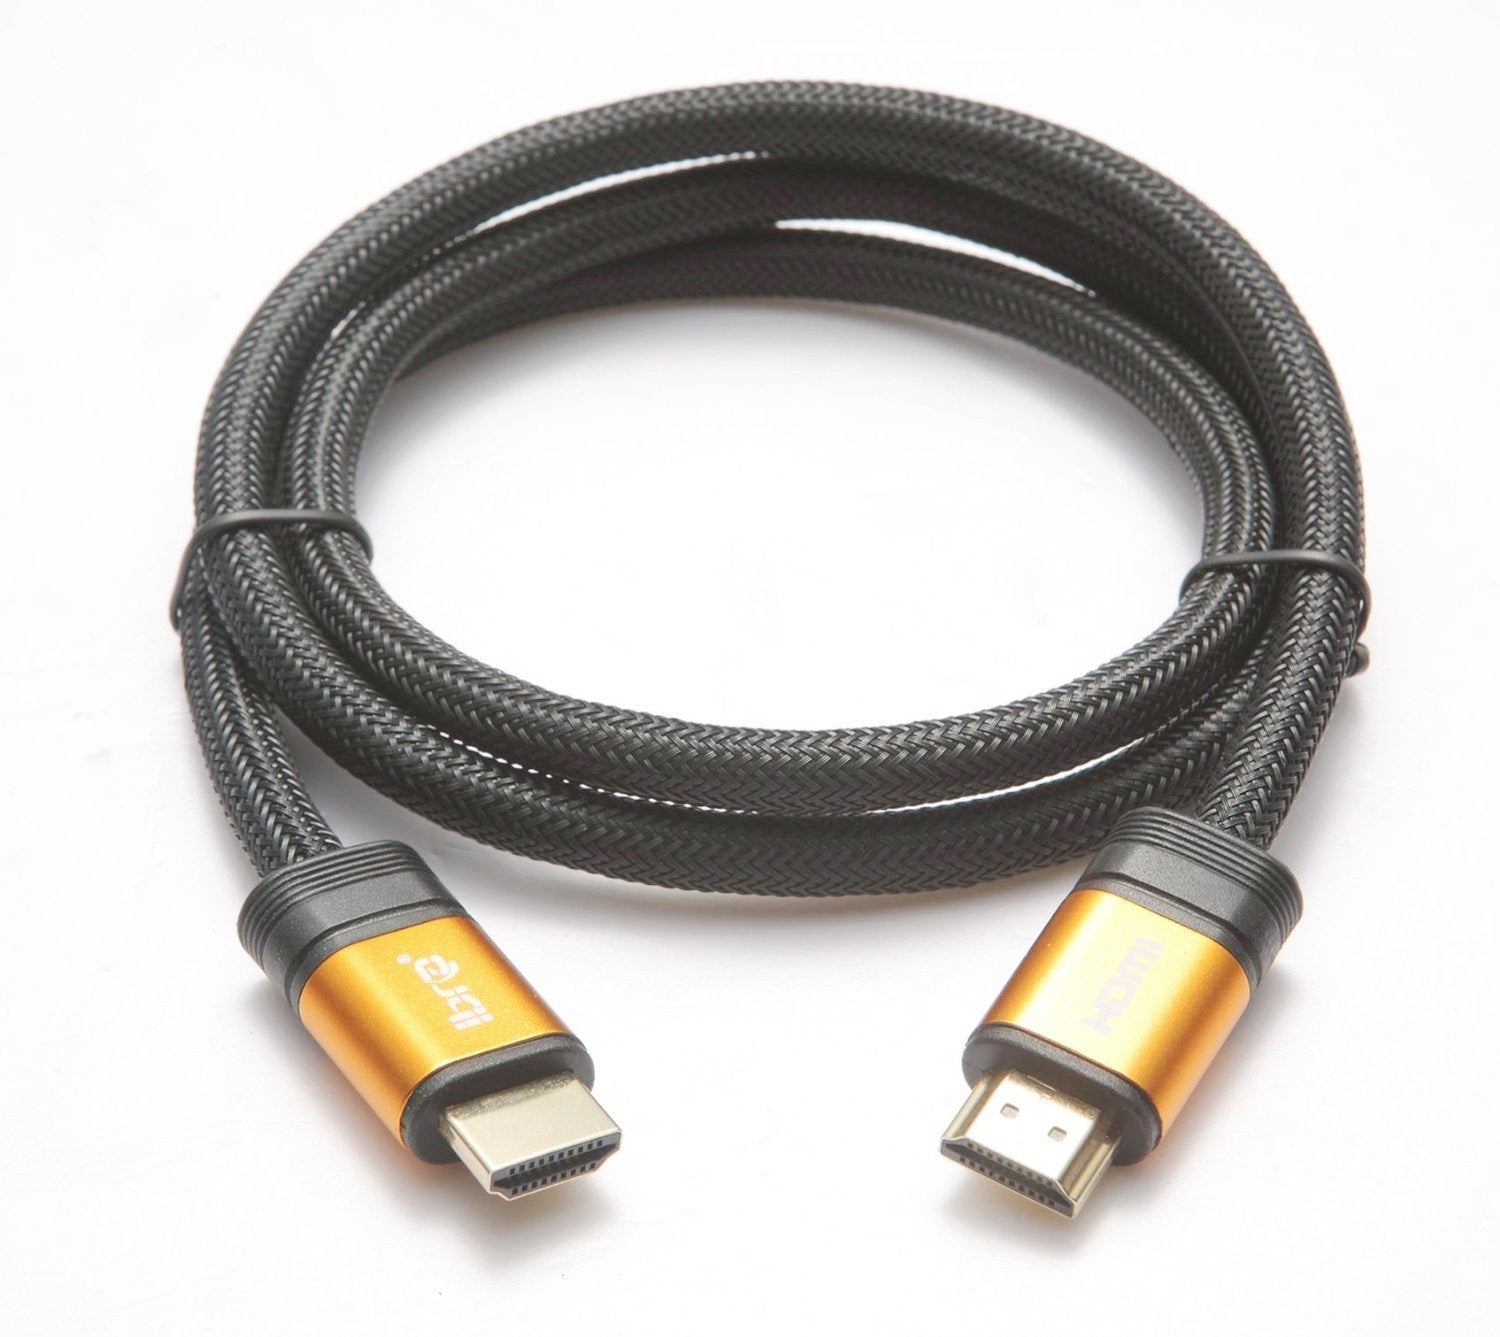 IBRA Orange HDMI Cable 9M - UHD HDMI 2.0 (4K@60Hz) Ready -18Gbps-28AWG Braided Cord -Gold Plated Connectors -Ethernet,Audio Return-Video 4K 2160p,HD 1080p,3D -Xbox PlayStation PS3 PS4 PC Apple TV